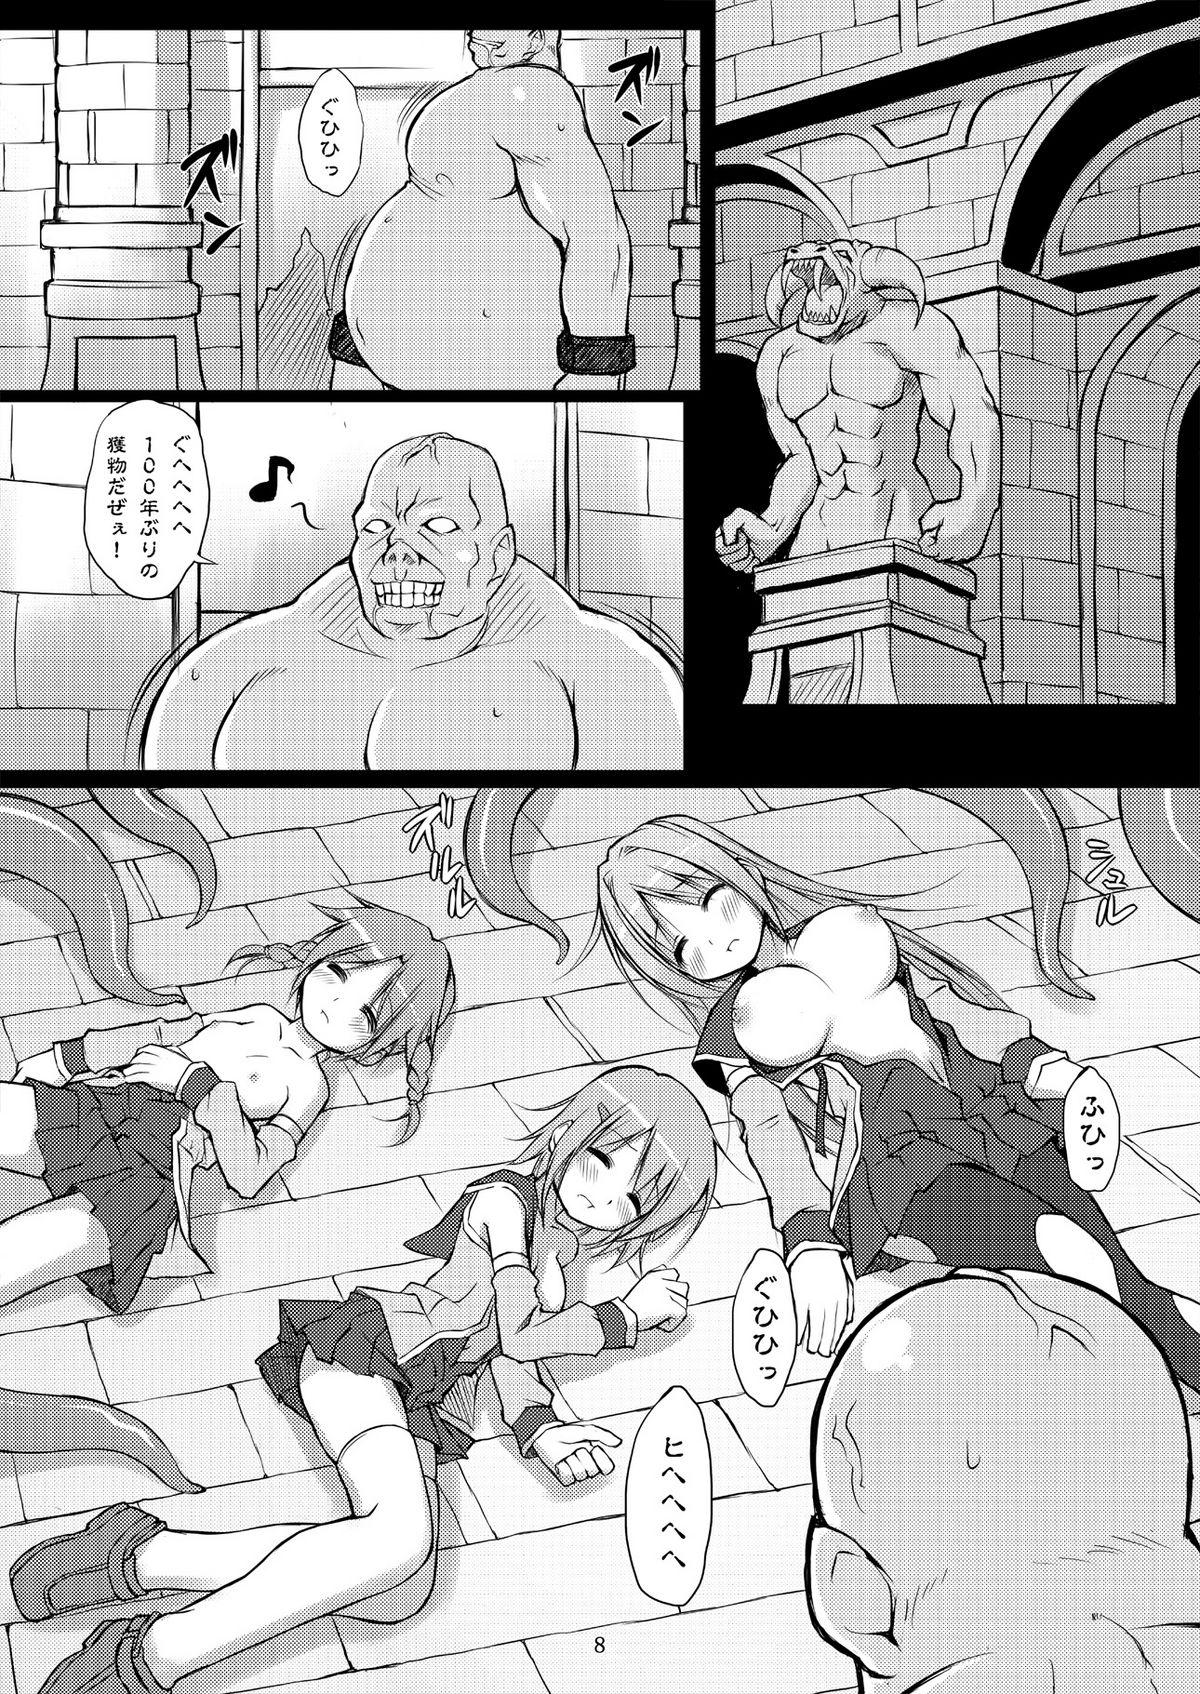 Double Blowjob 魔法戦士触獄に堕つ～獄卒の洗礼～ Indoor - Page 8